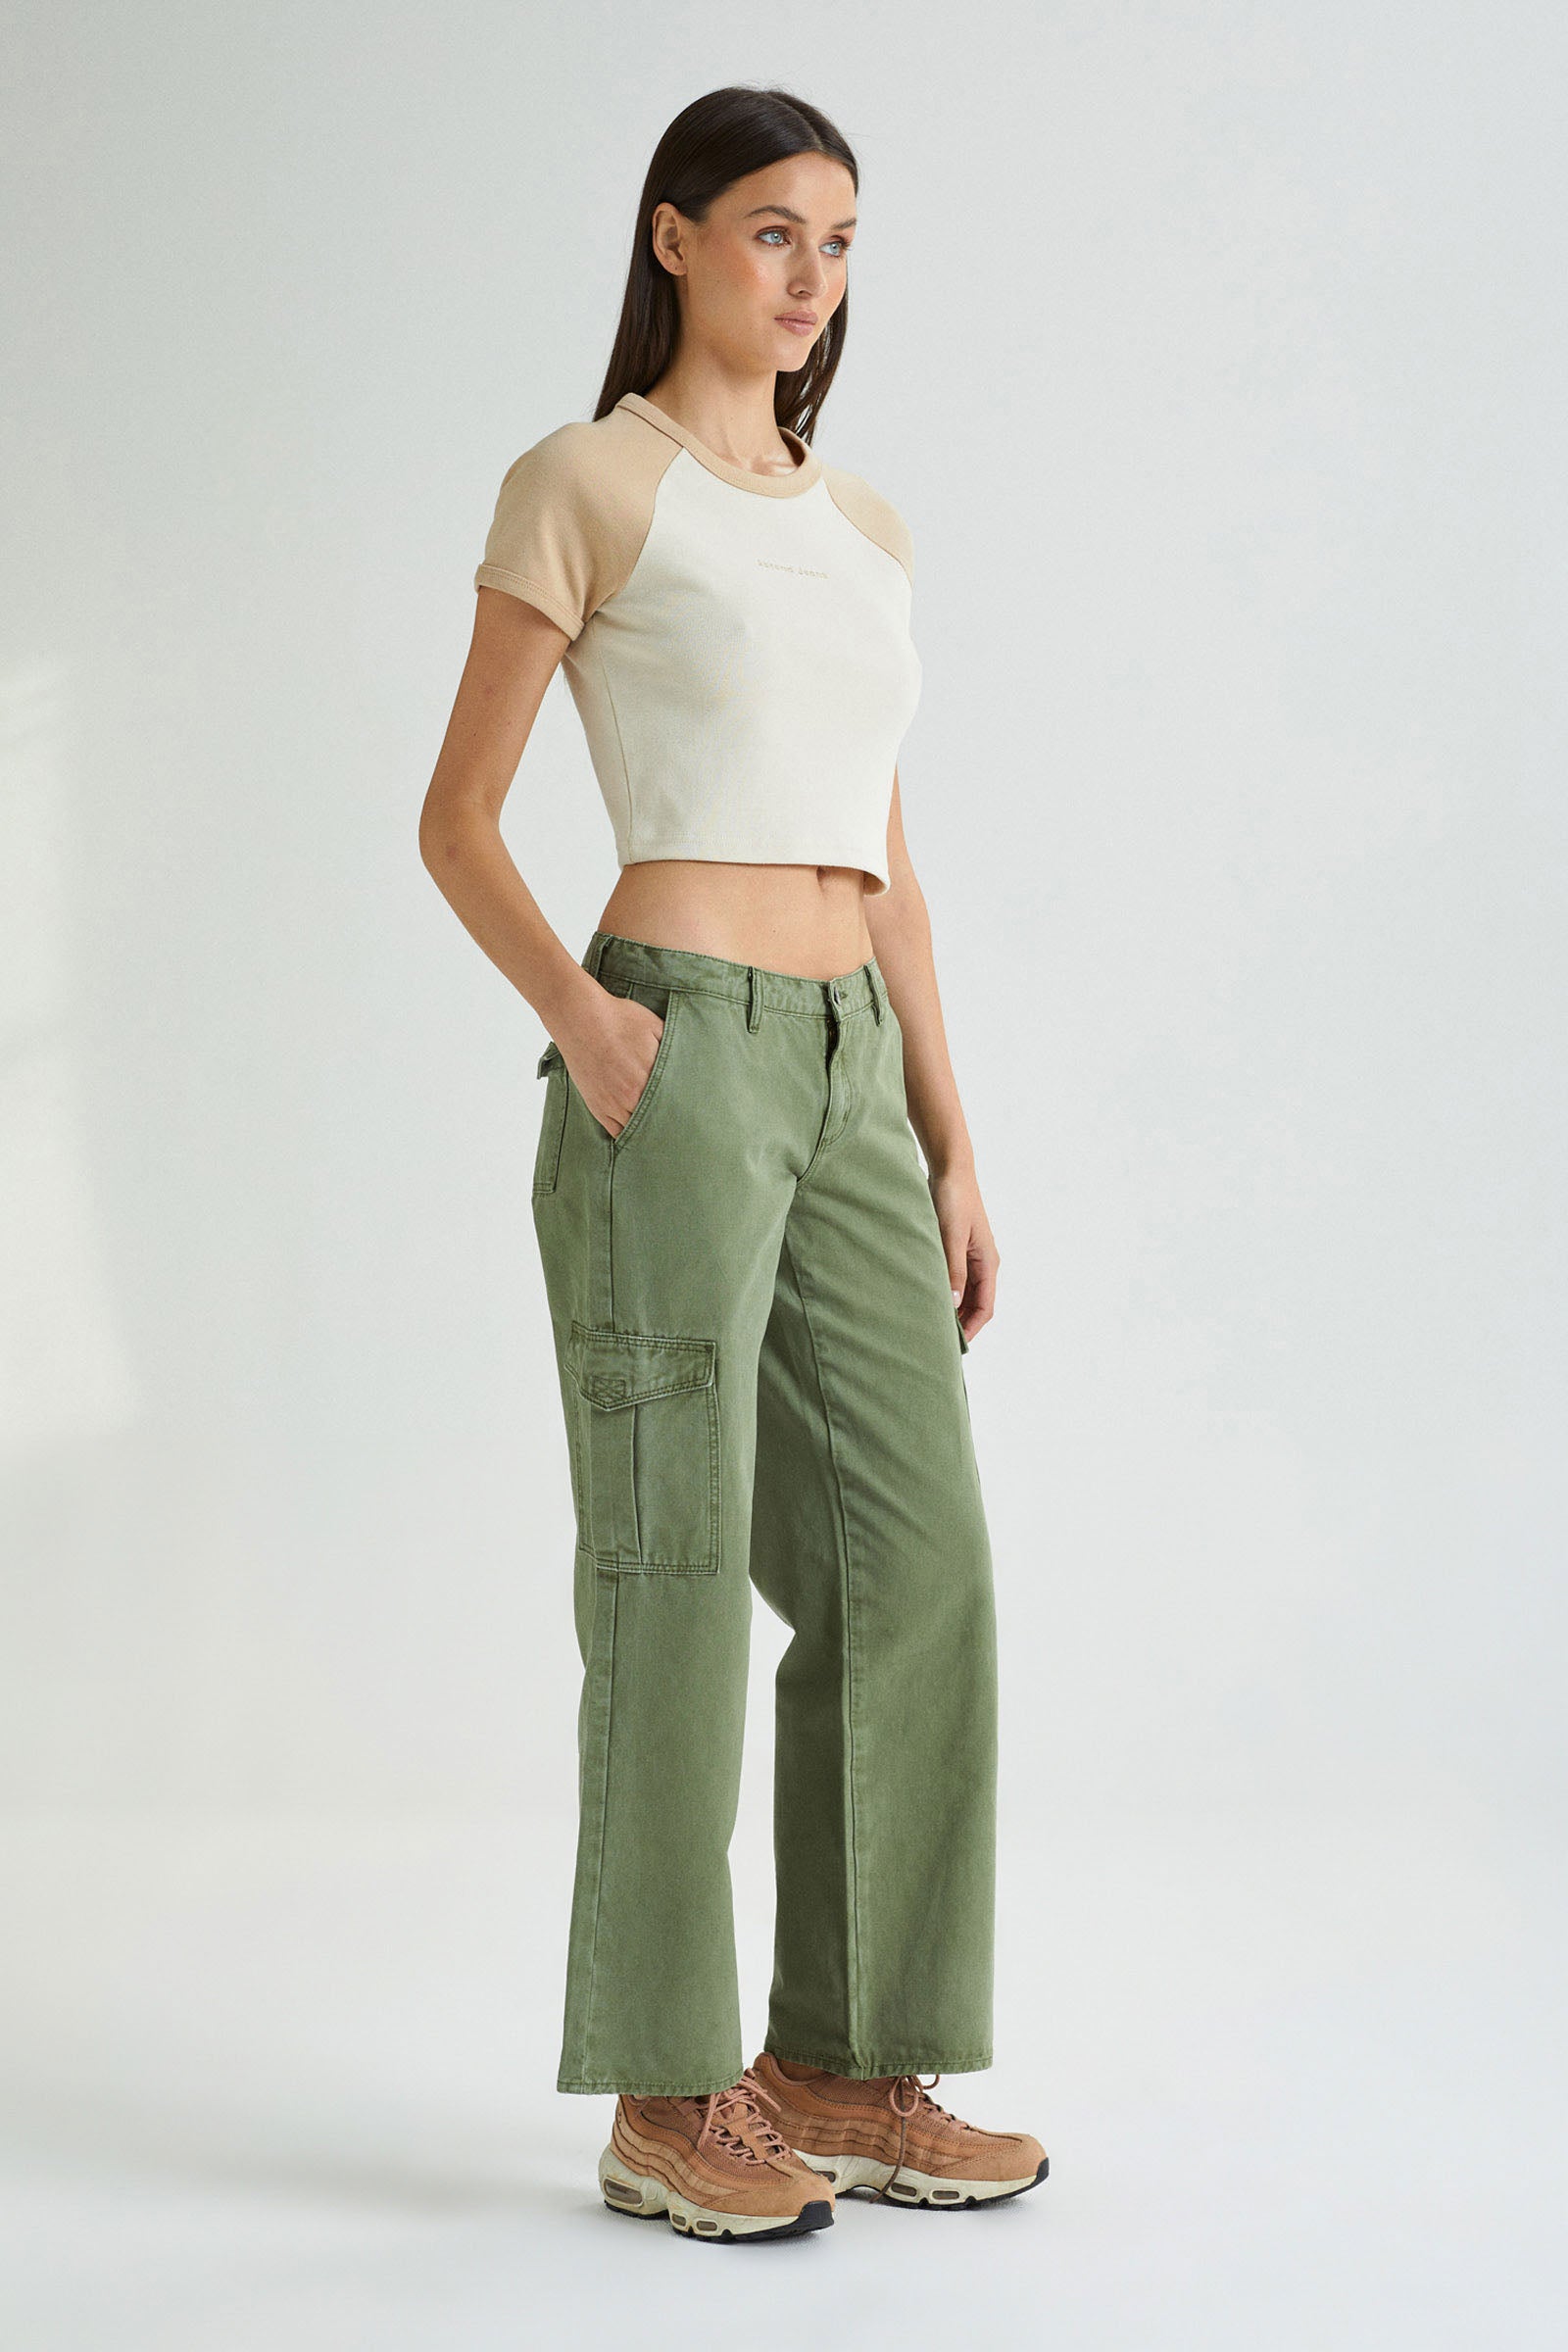 Pantalon Cargo Mujer Beige - Andino Outfitters